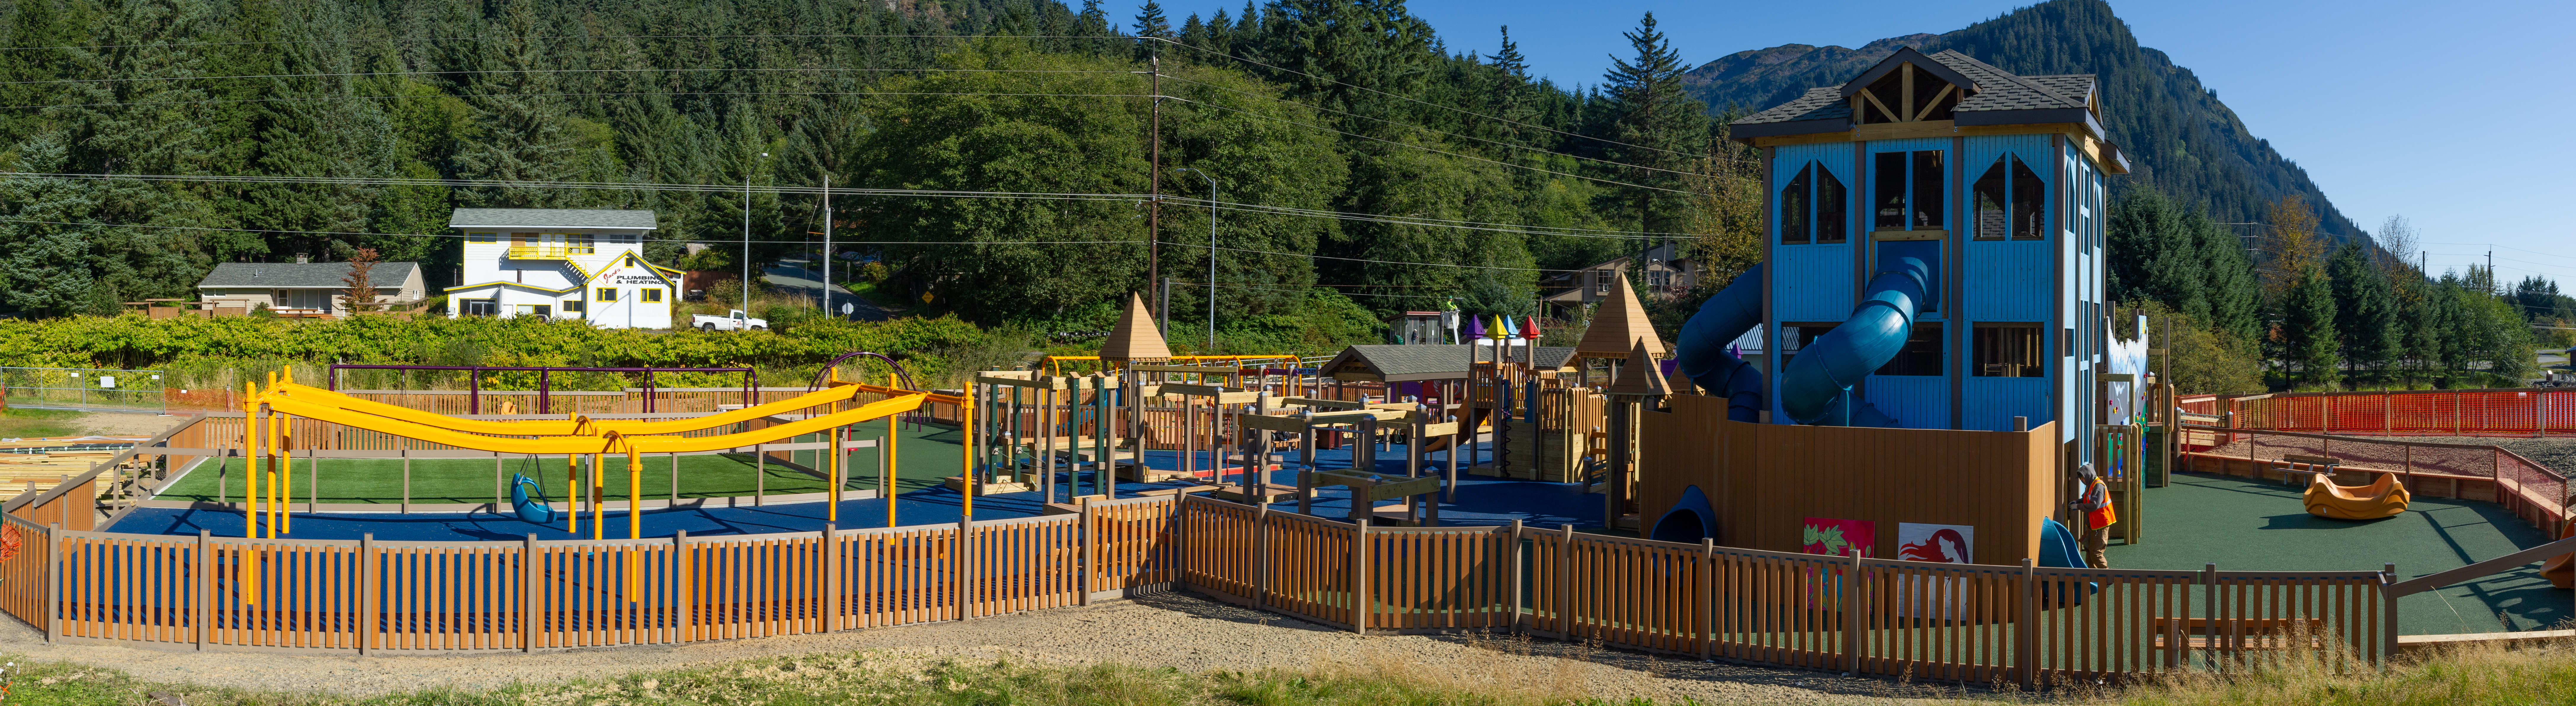 A view of the play equipment at Project Playground.